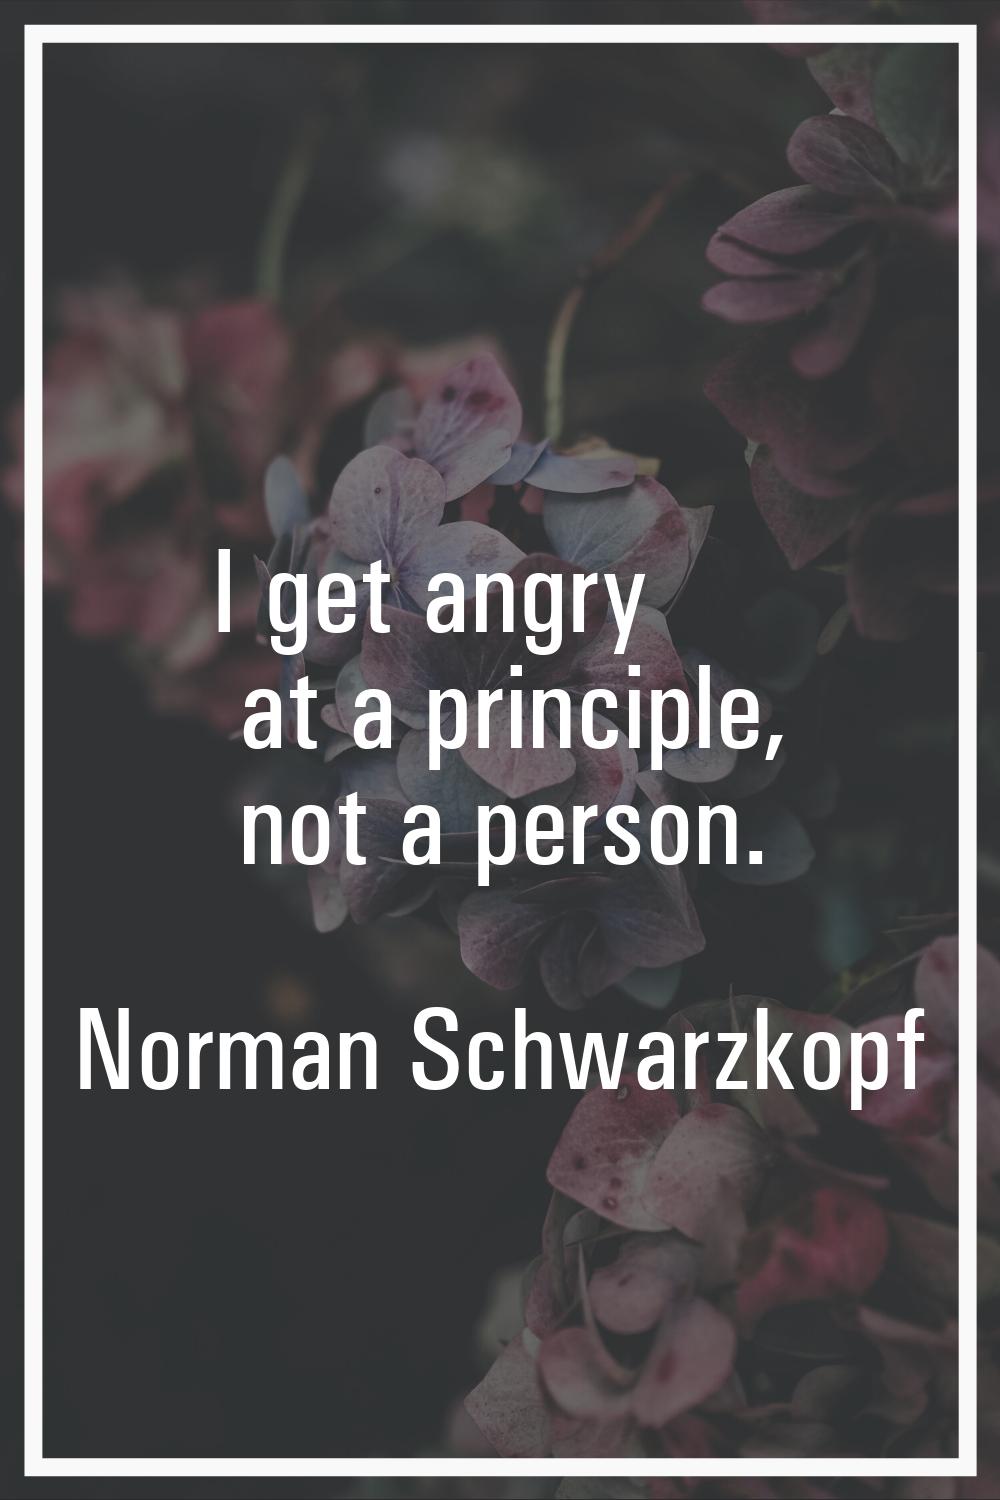 I get angry at a principle, not a person.